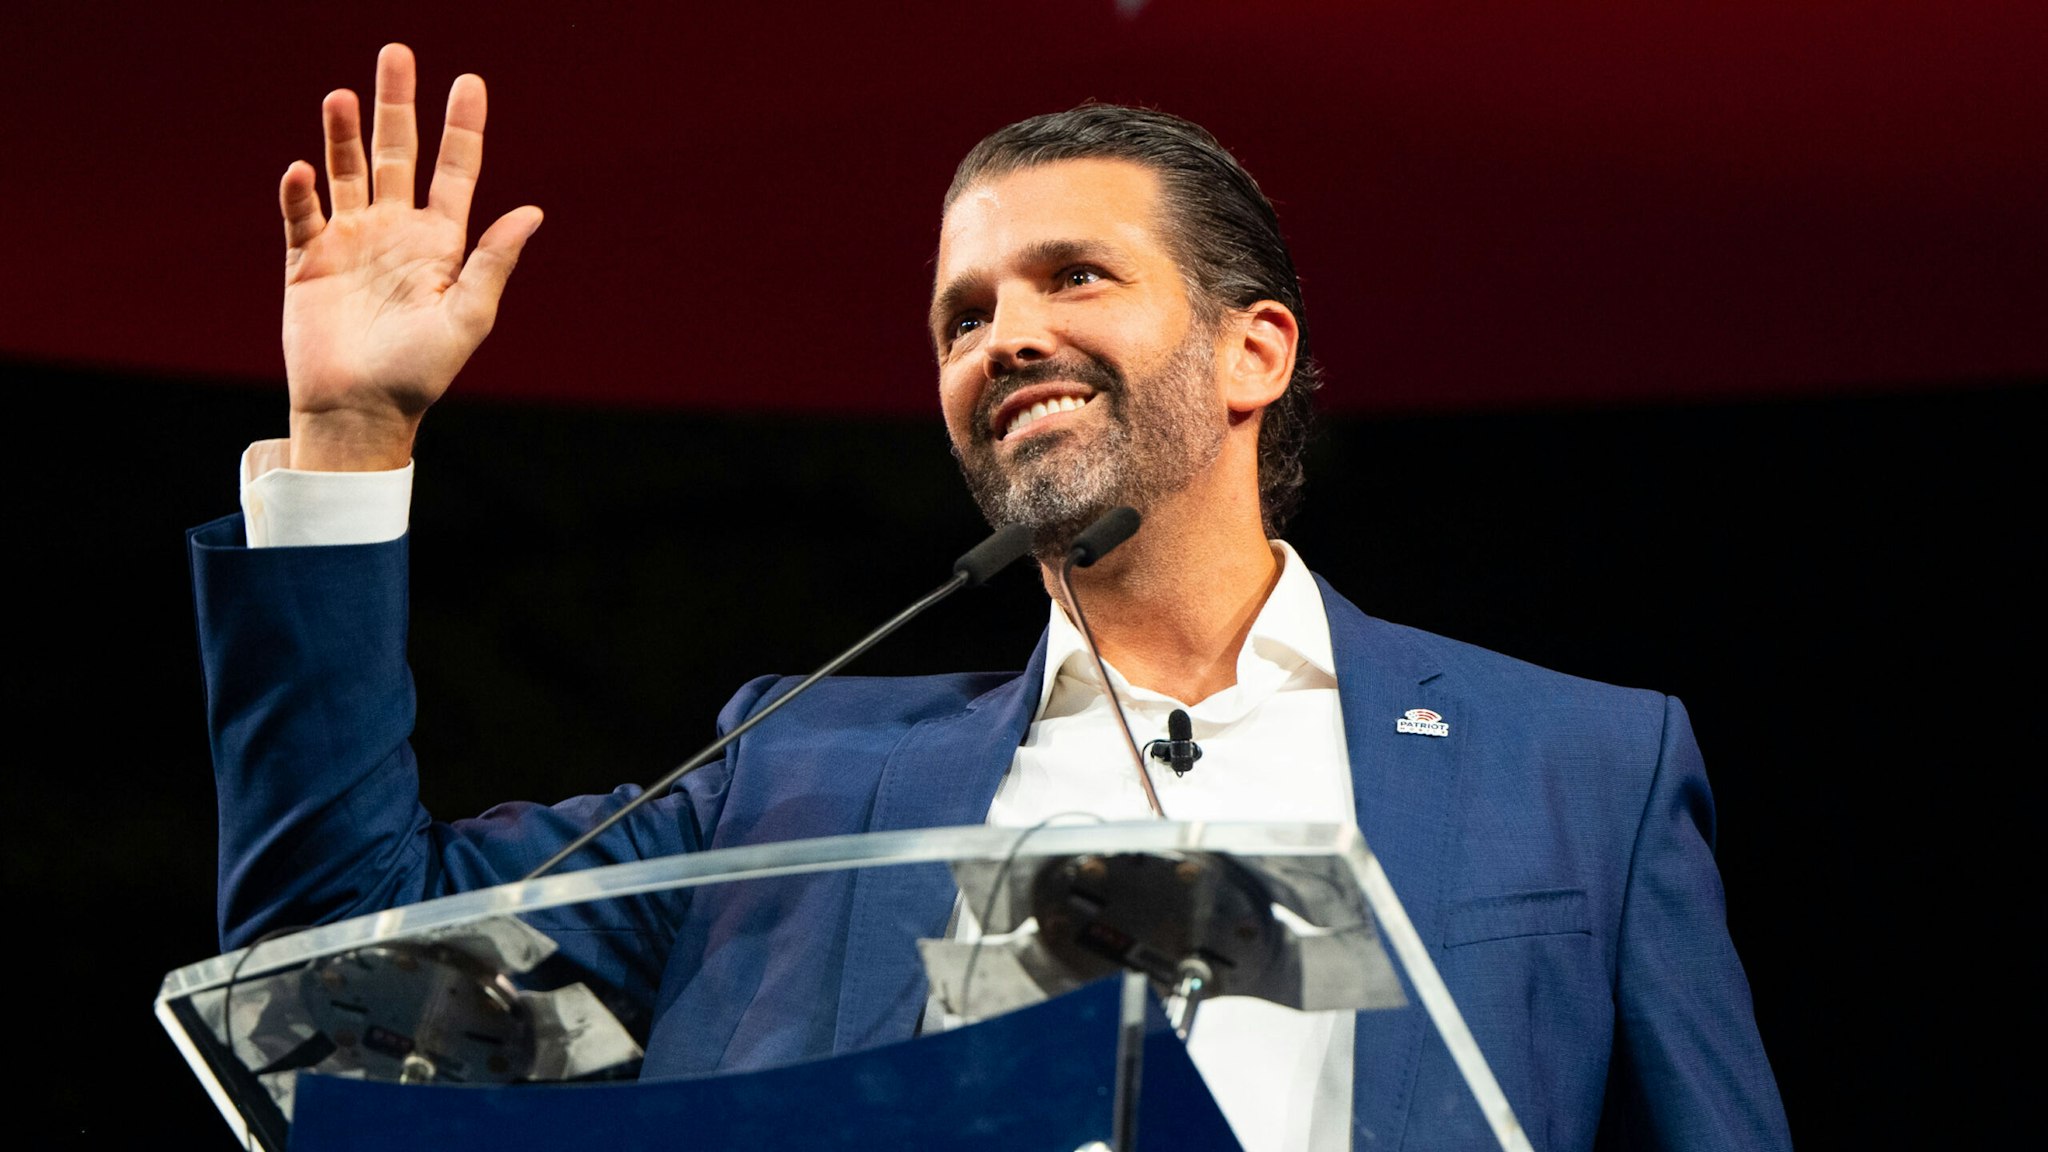 DALLAS, TEXAS - JULY 09: Donald Trump Jr. waves after speaking during the Conservative Political Action Conference CPAC held at the Hilton Anatole on July 09, 2021 in Dallas, Texas. CPAC began in 1974, and is a conference that brings together and hosts conservative organizations, activists, and world leaders in discussing current events and future political agendas.